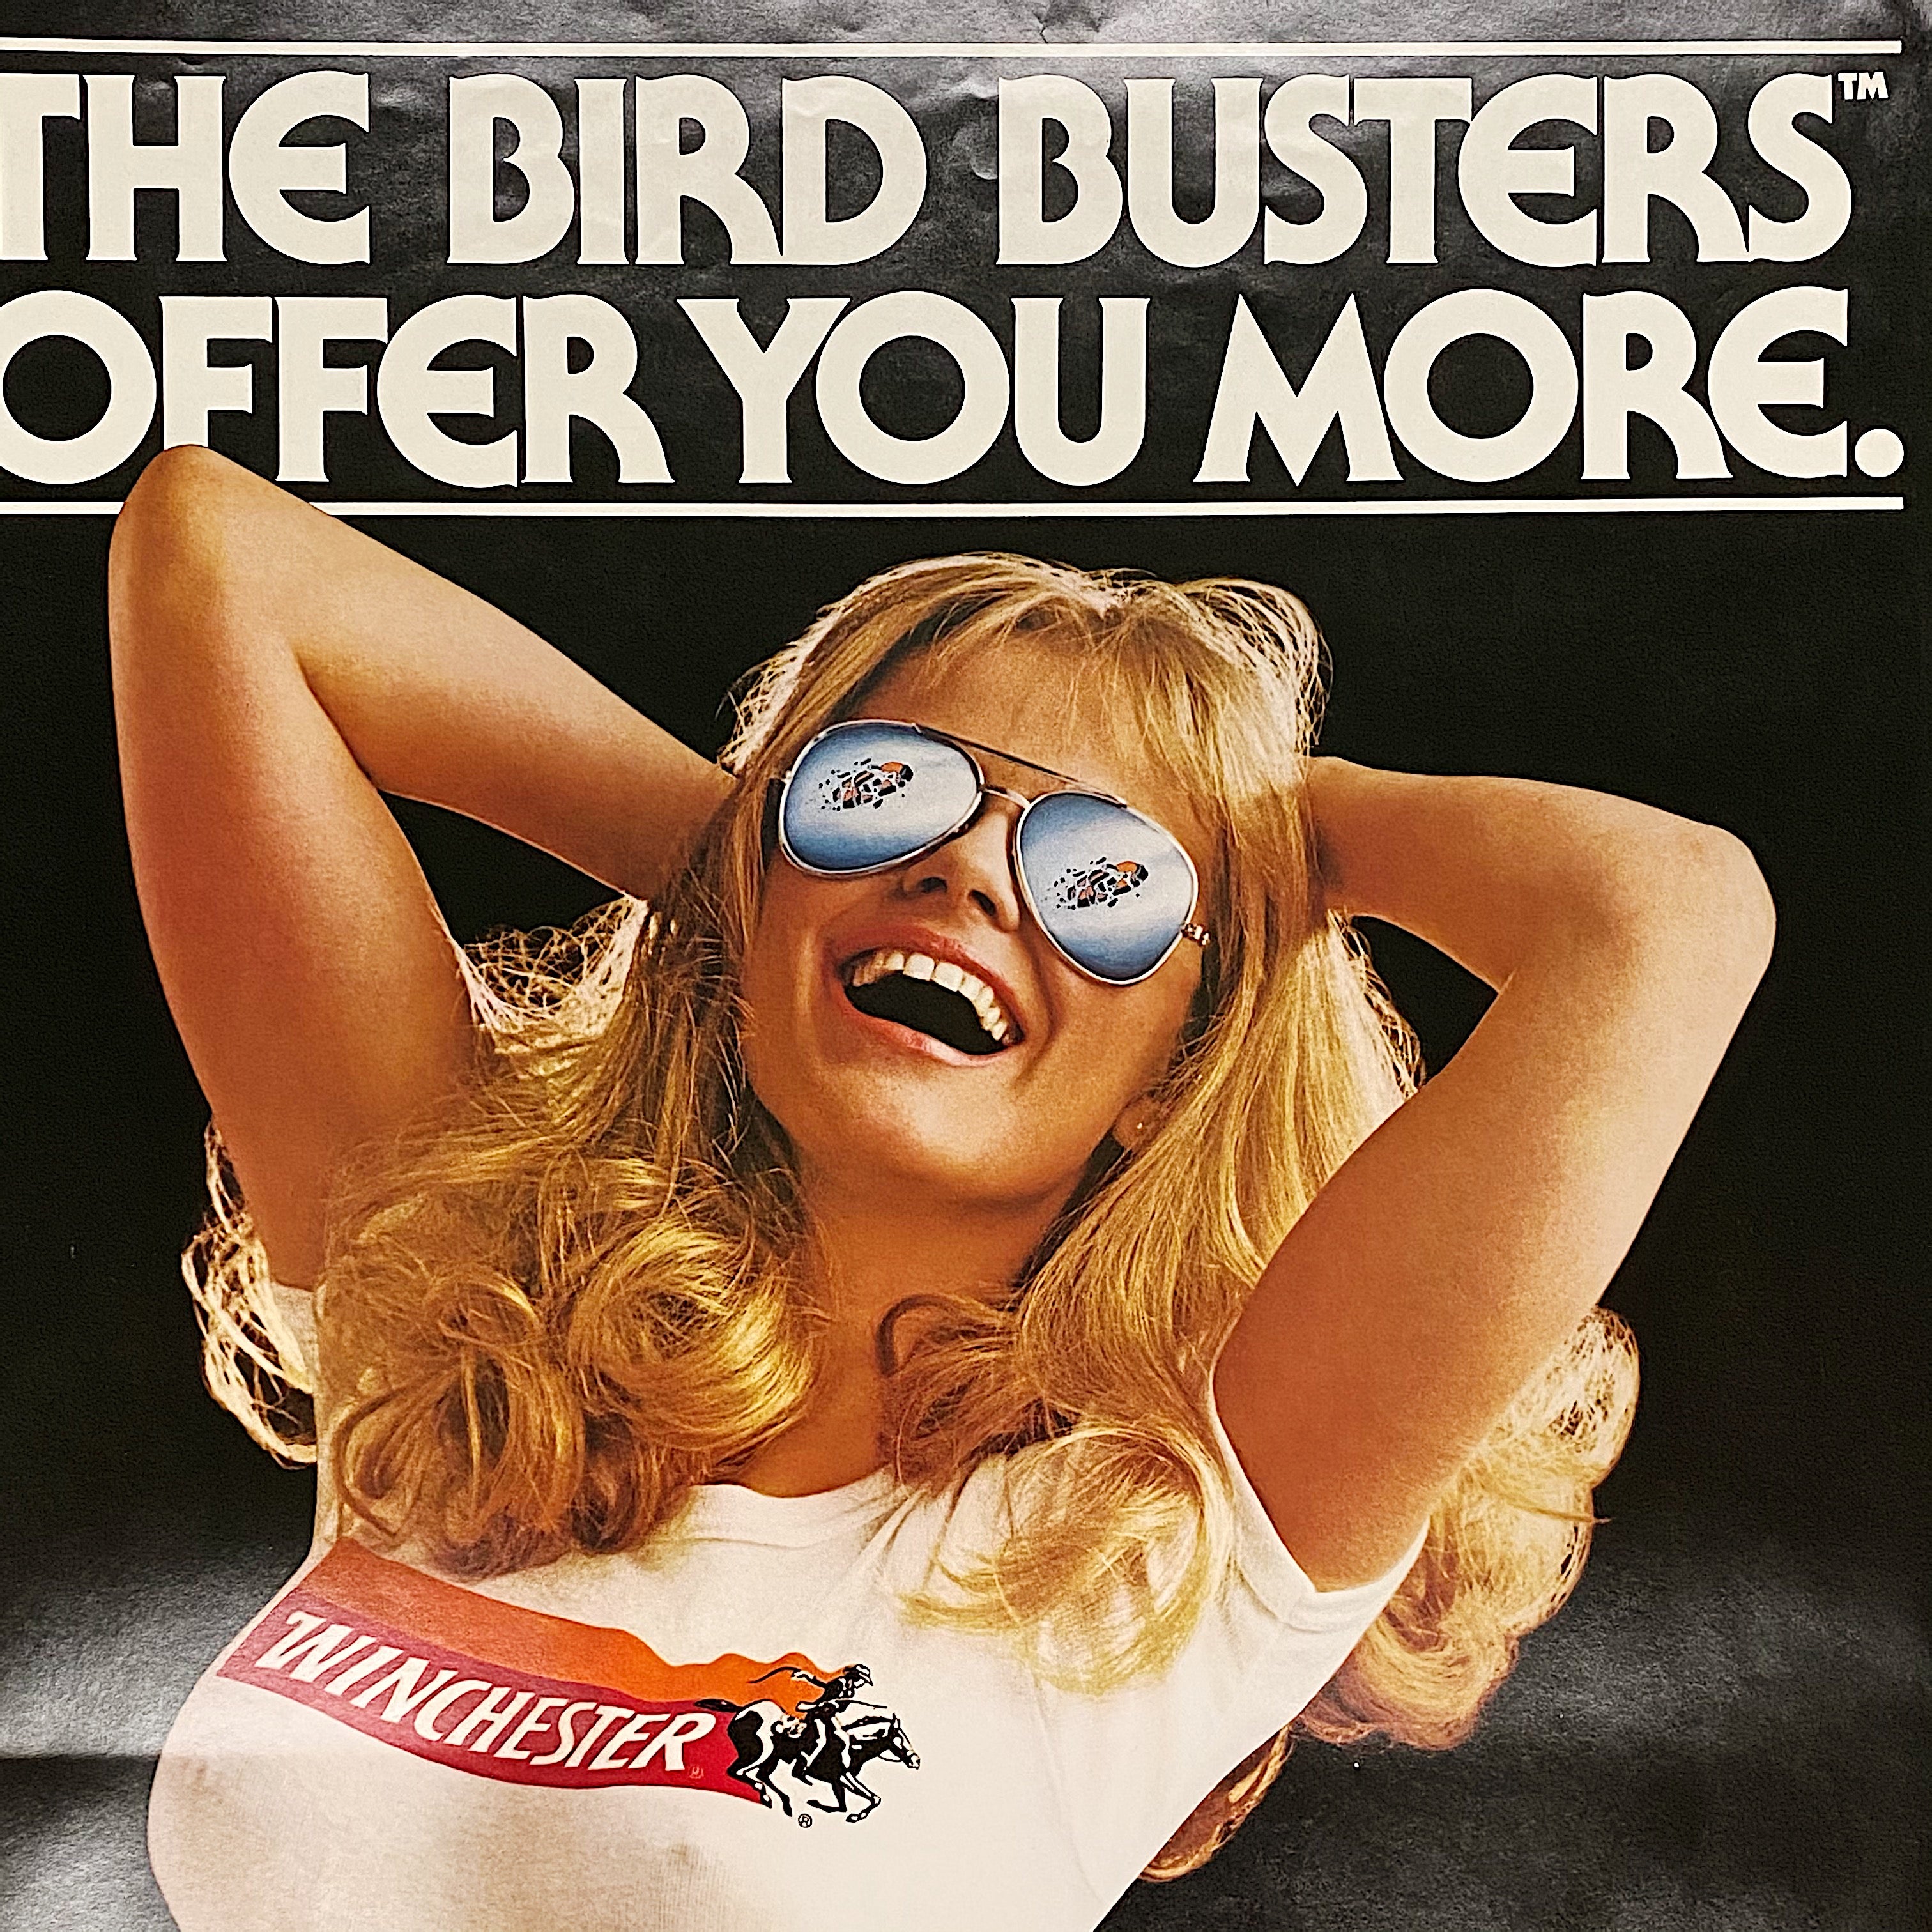 Rare Winchester Poster from 1982 - Bird Busters Offer You More - Vintage 1980s Posters - Richard Fegley Playboy Photographer - 28" x 20"